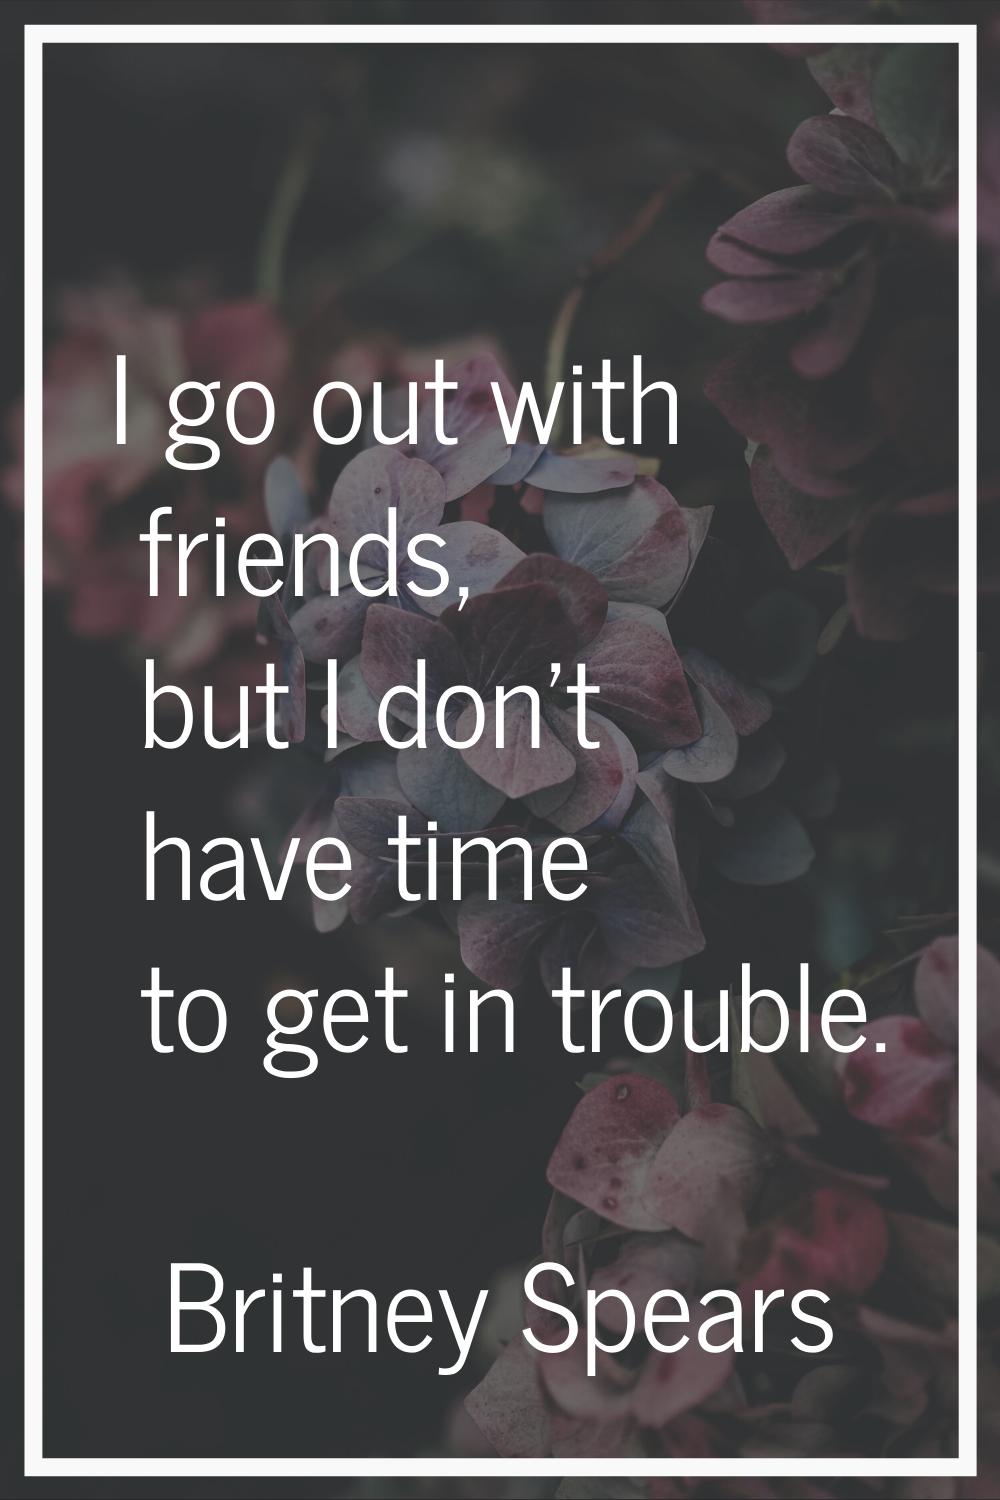 I go out with friends, but I don't have time to get in trouble.